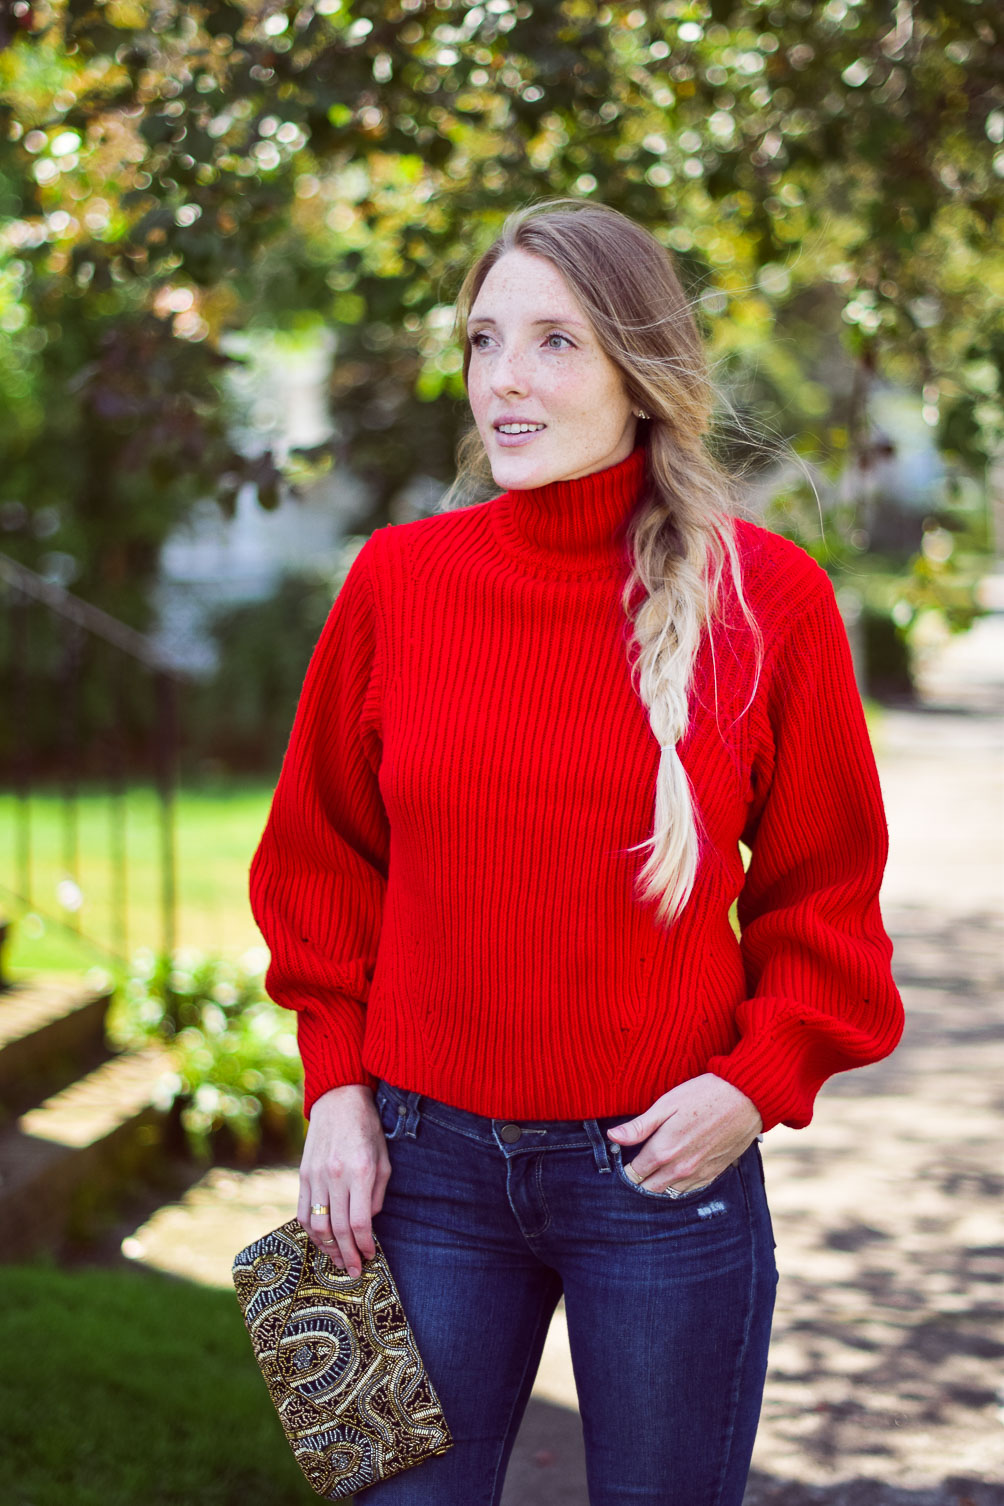 wearing a bright poppy red cashmere blend sweater with step hem jeans and block heel sandals